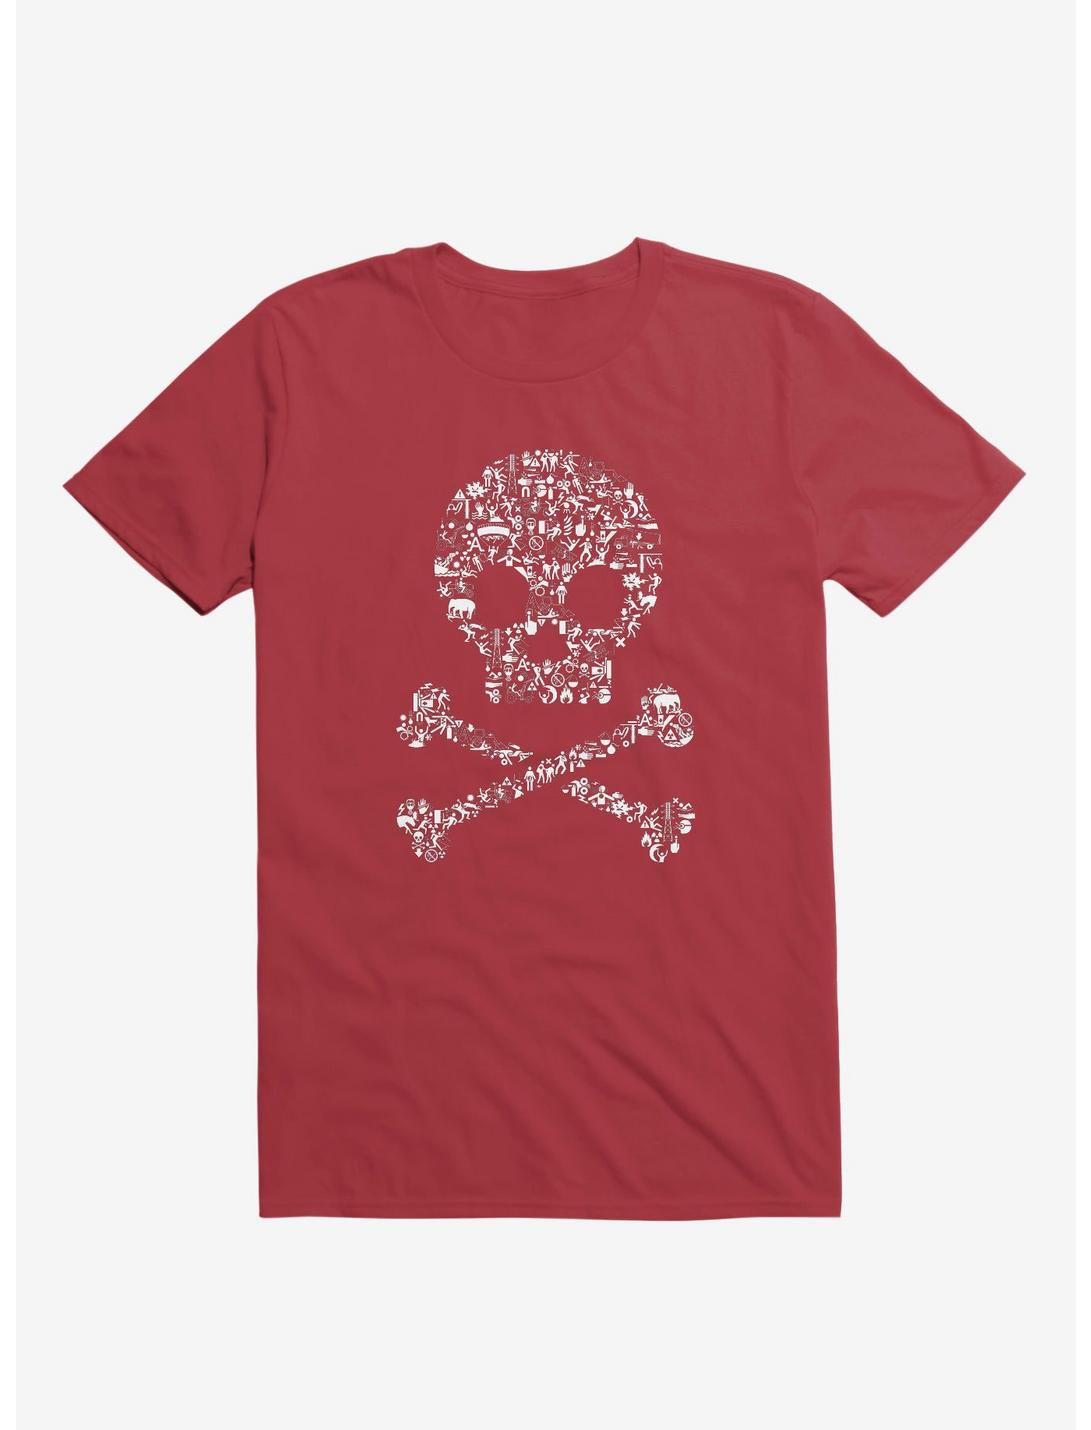 Stick Figures In Peril T-Shirt, RED, hi-res